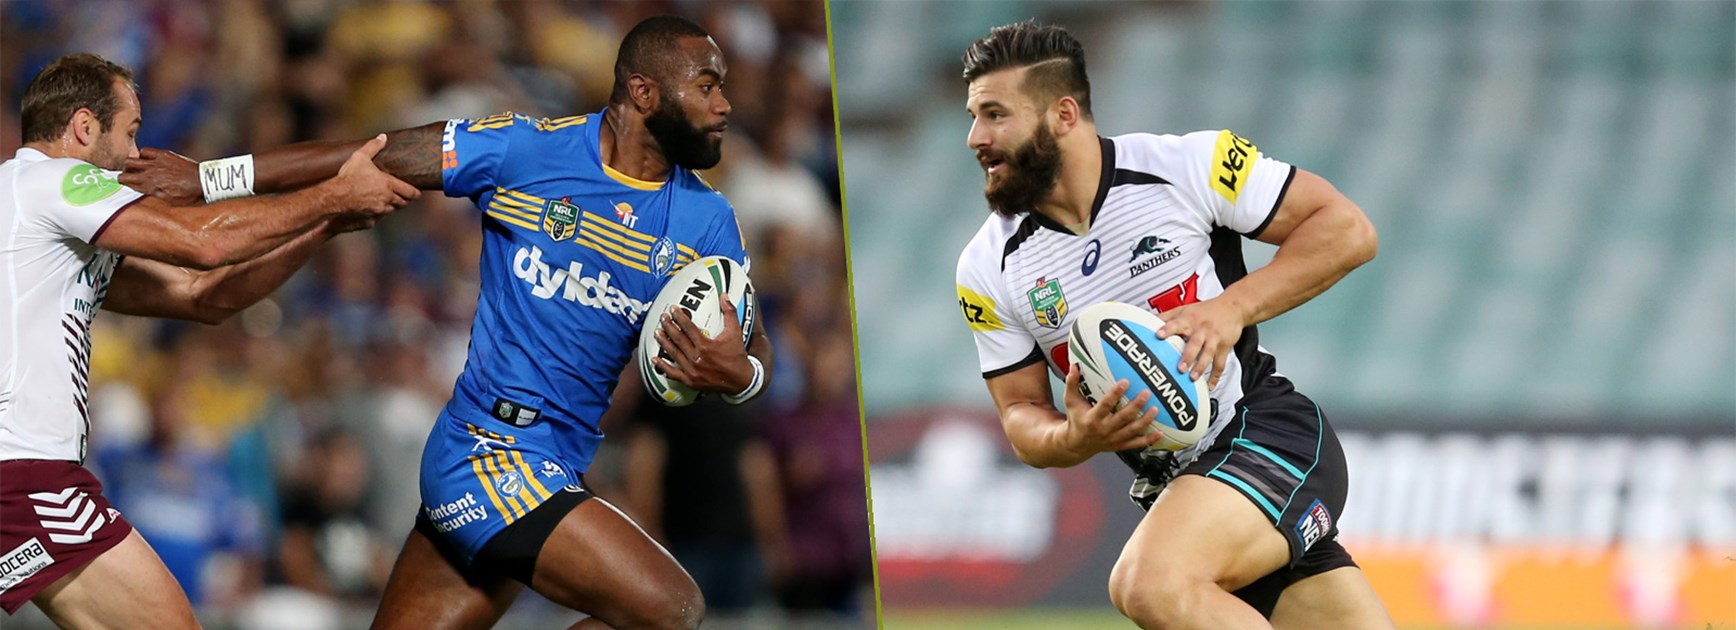 Rampaging wingers Semi Radradra and Josh Mansour are two of the hardest men to stop in the NRL.